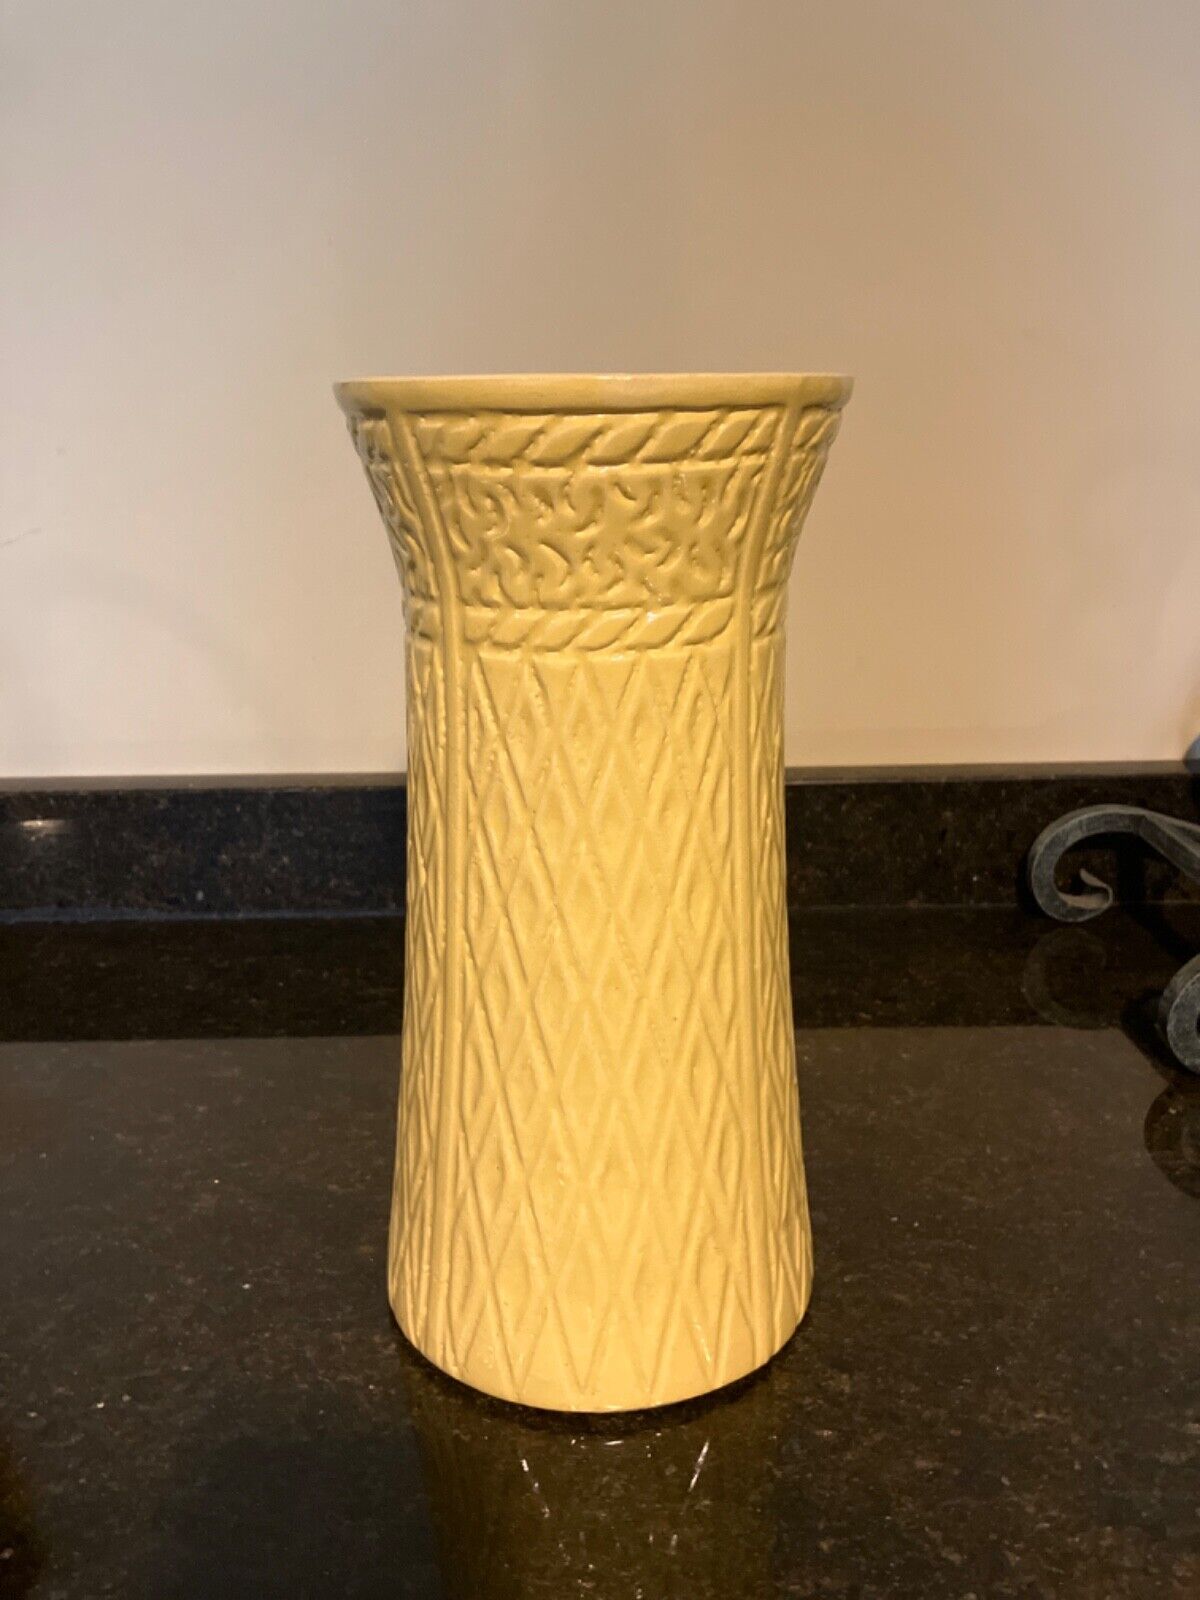 Antique tall yellow pottery vase 12.5” high with carvings